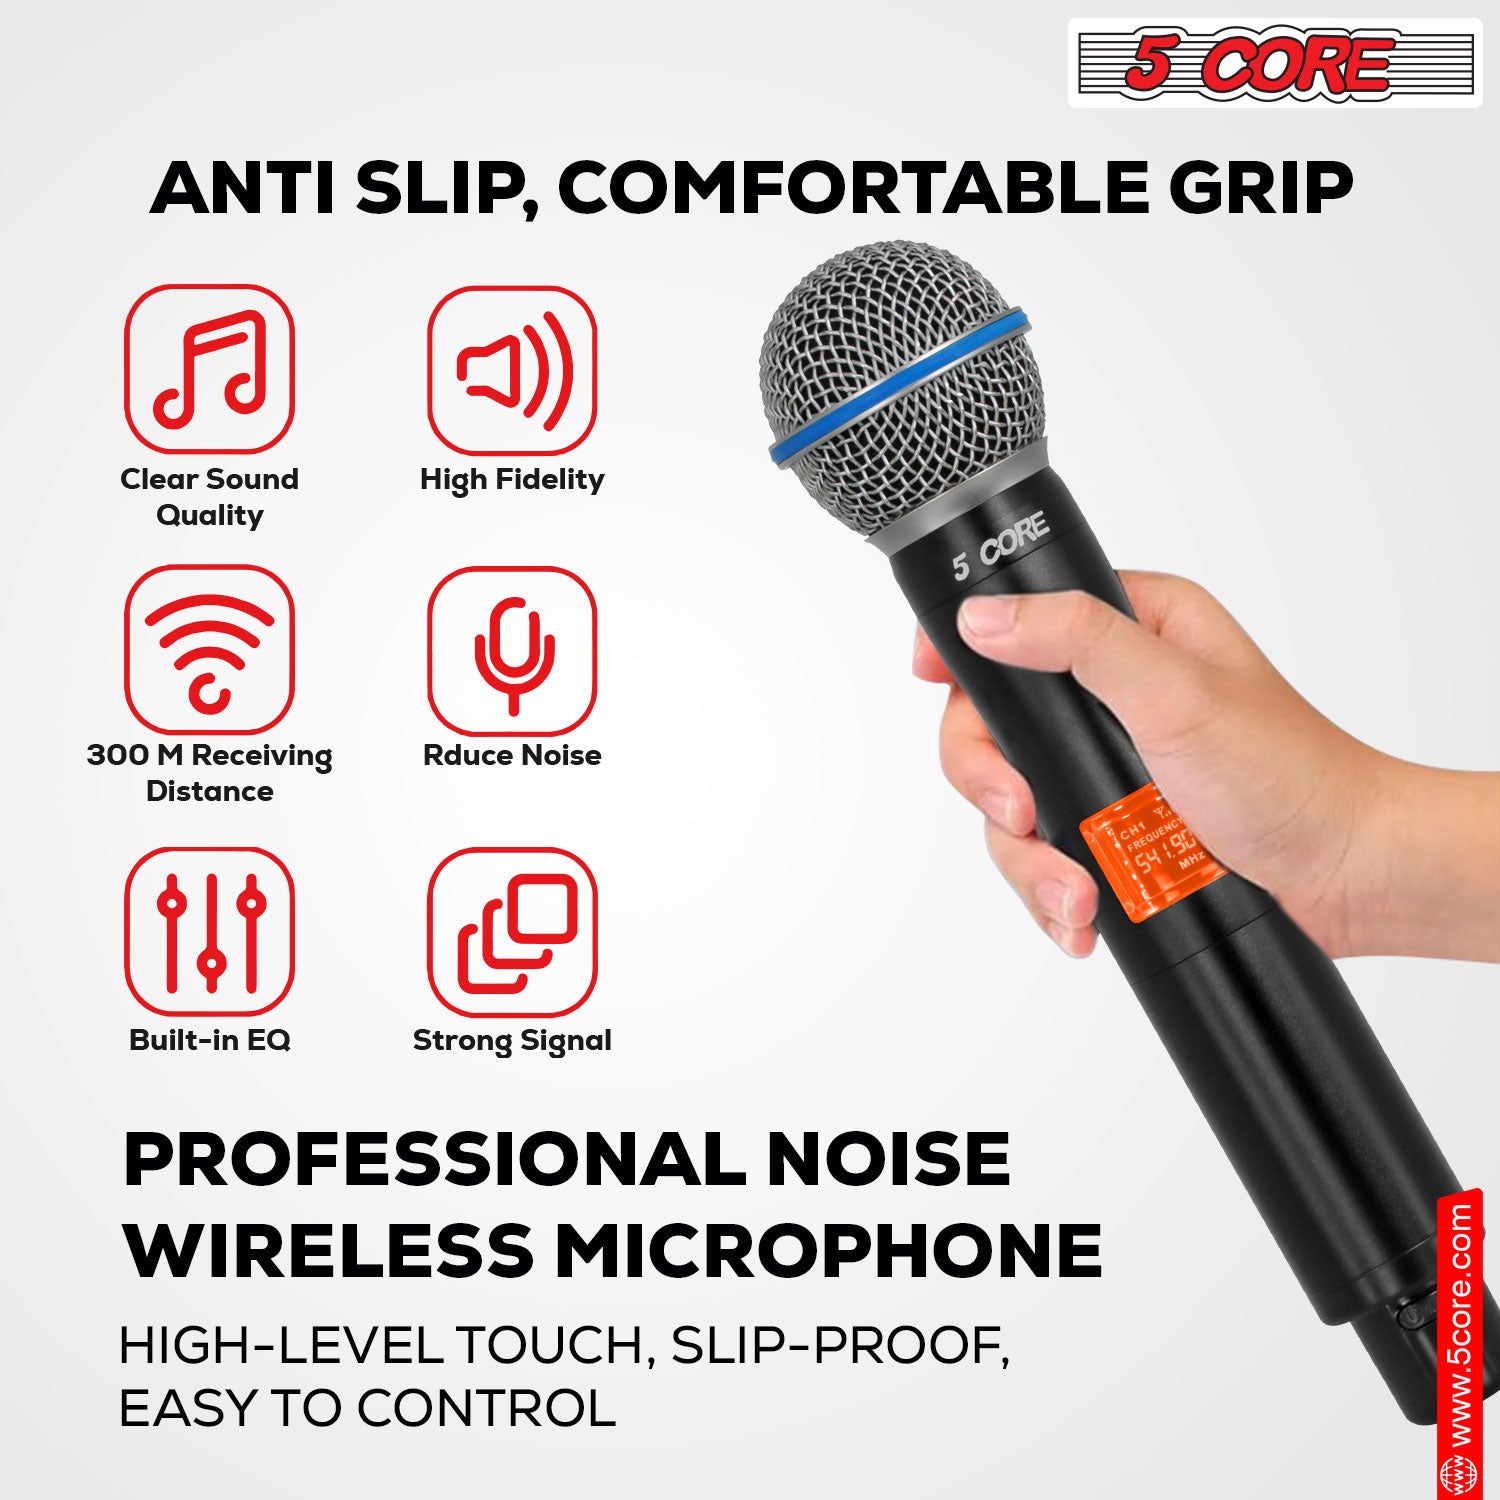 Highly Compatible and Flexible Use: Suitable for Karaoke, Meetings, Churches, and Events Where Multiple Speakers are Needed.